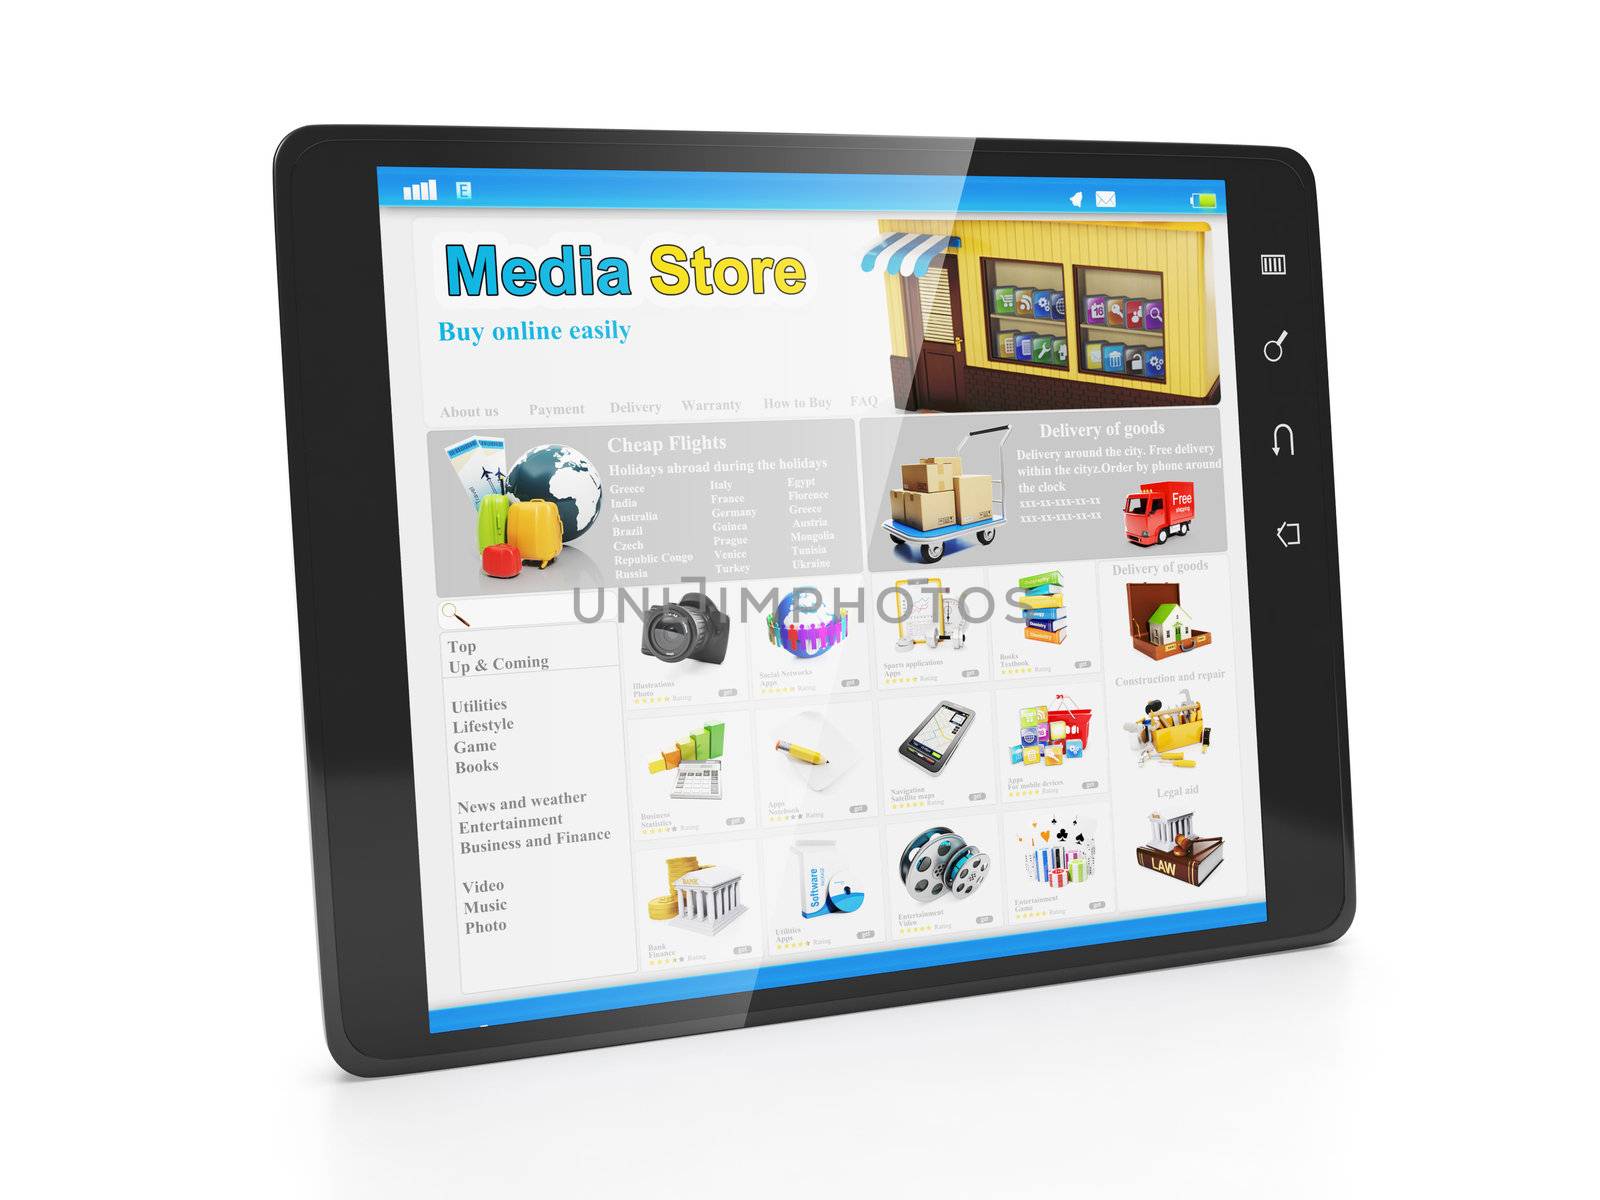 Store media applications. Tablet PC with an open webpage copper store